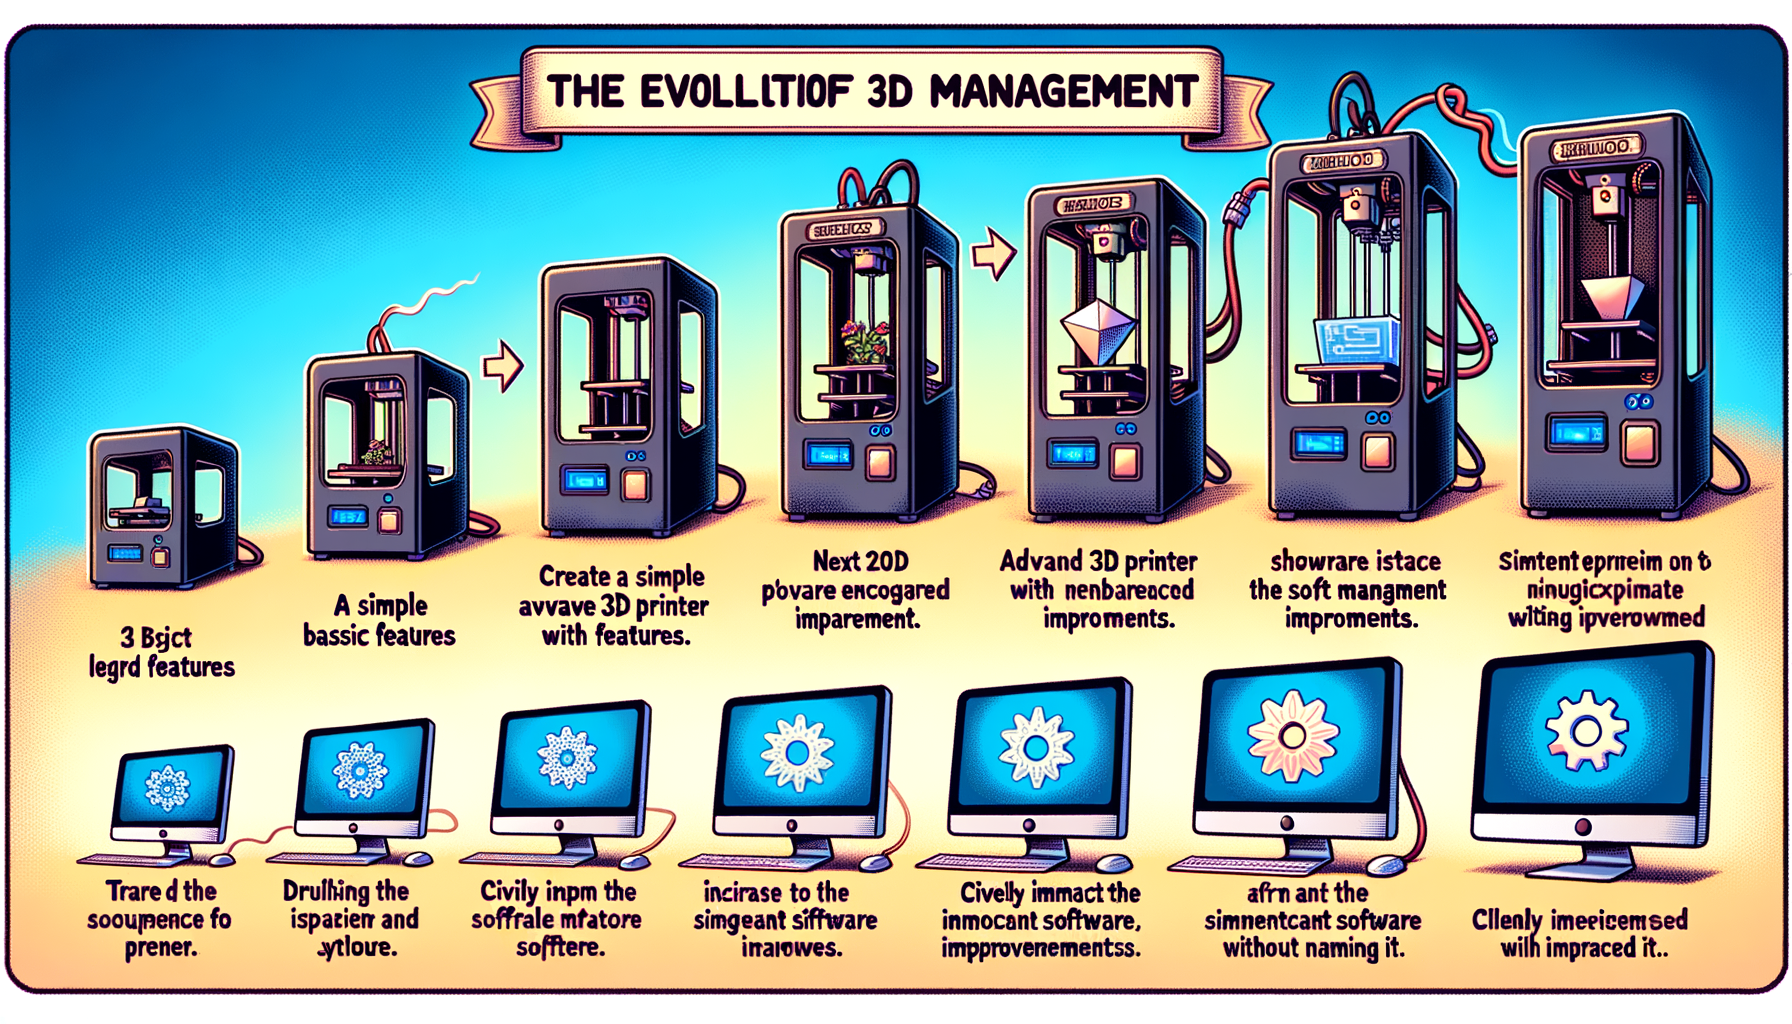 Design Software History: Evolution of 3D Printing Management: The Impact of Repetier-Host and Its Technological Innovations